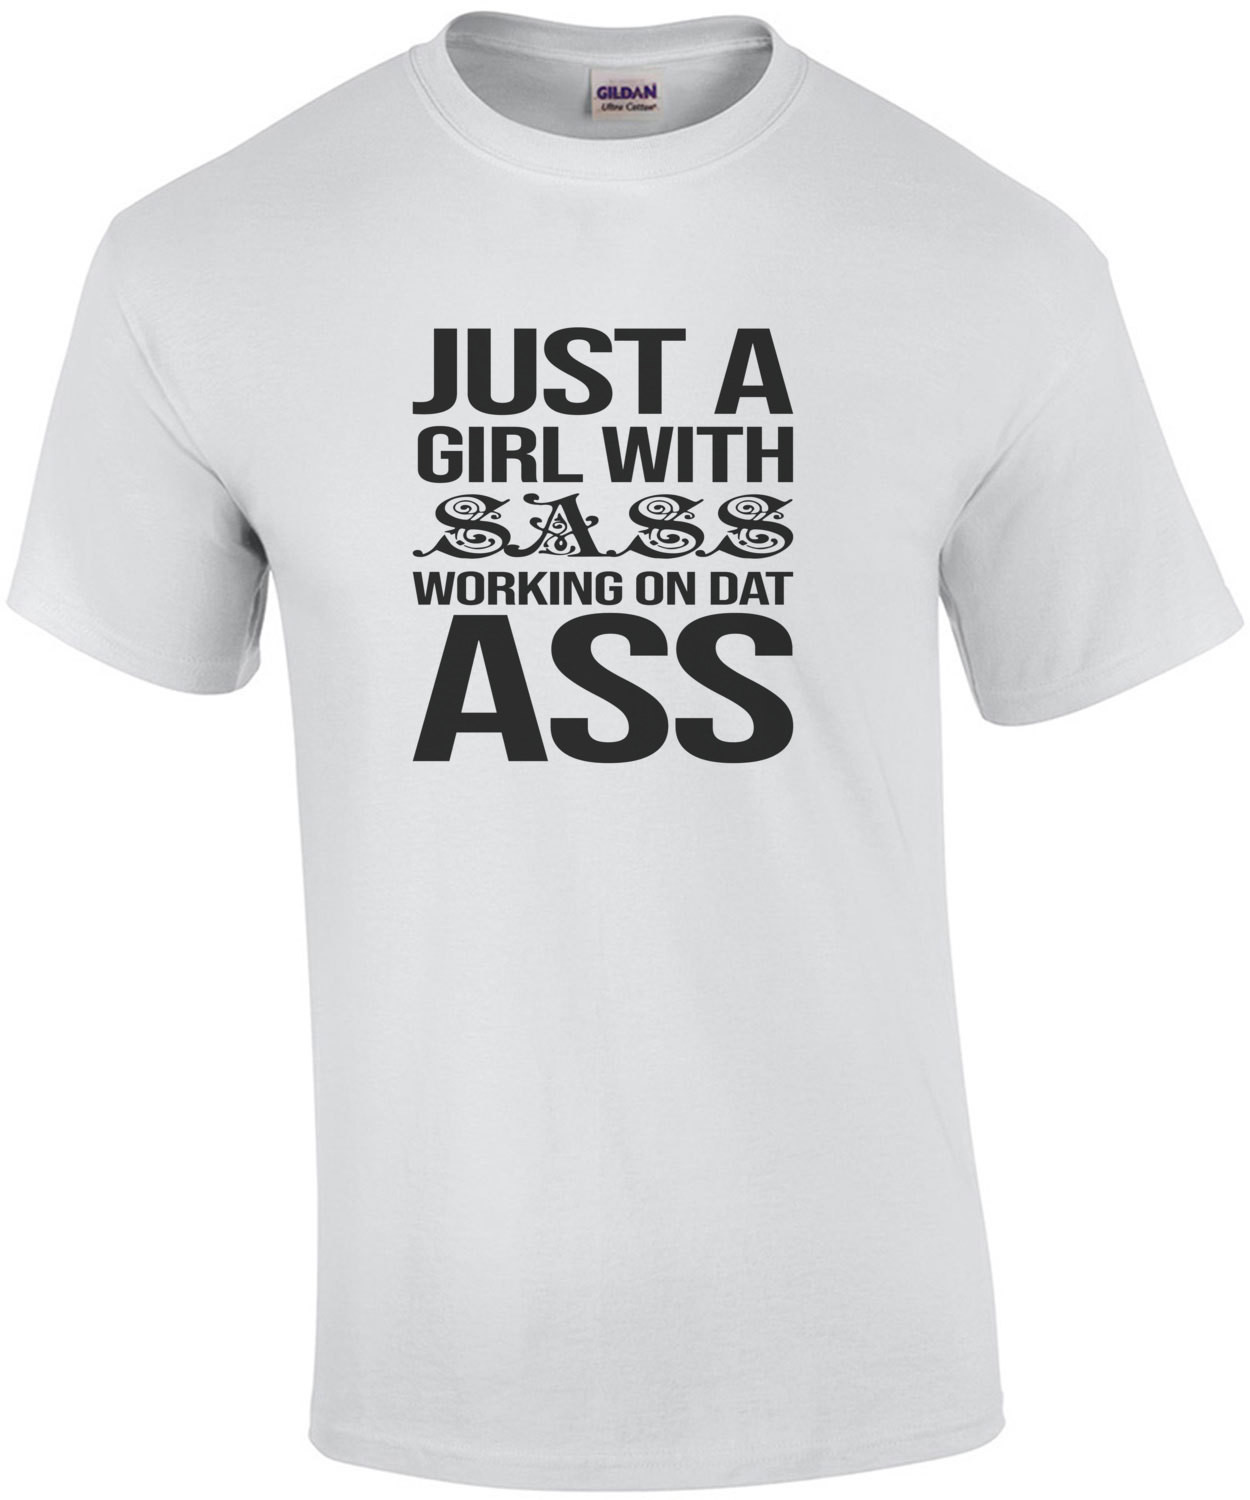 Just a girl with sass working on dat ass - funny ladies exercise t-shirt